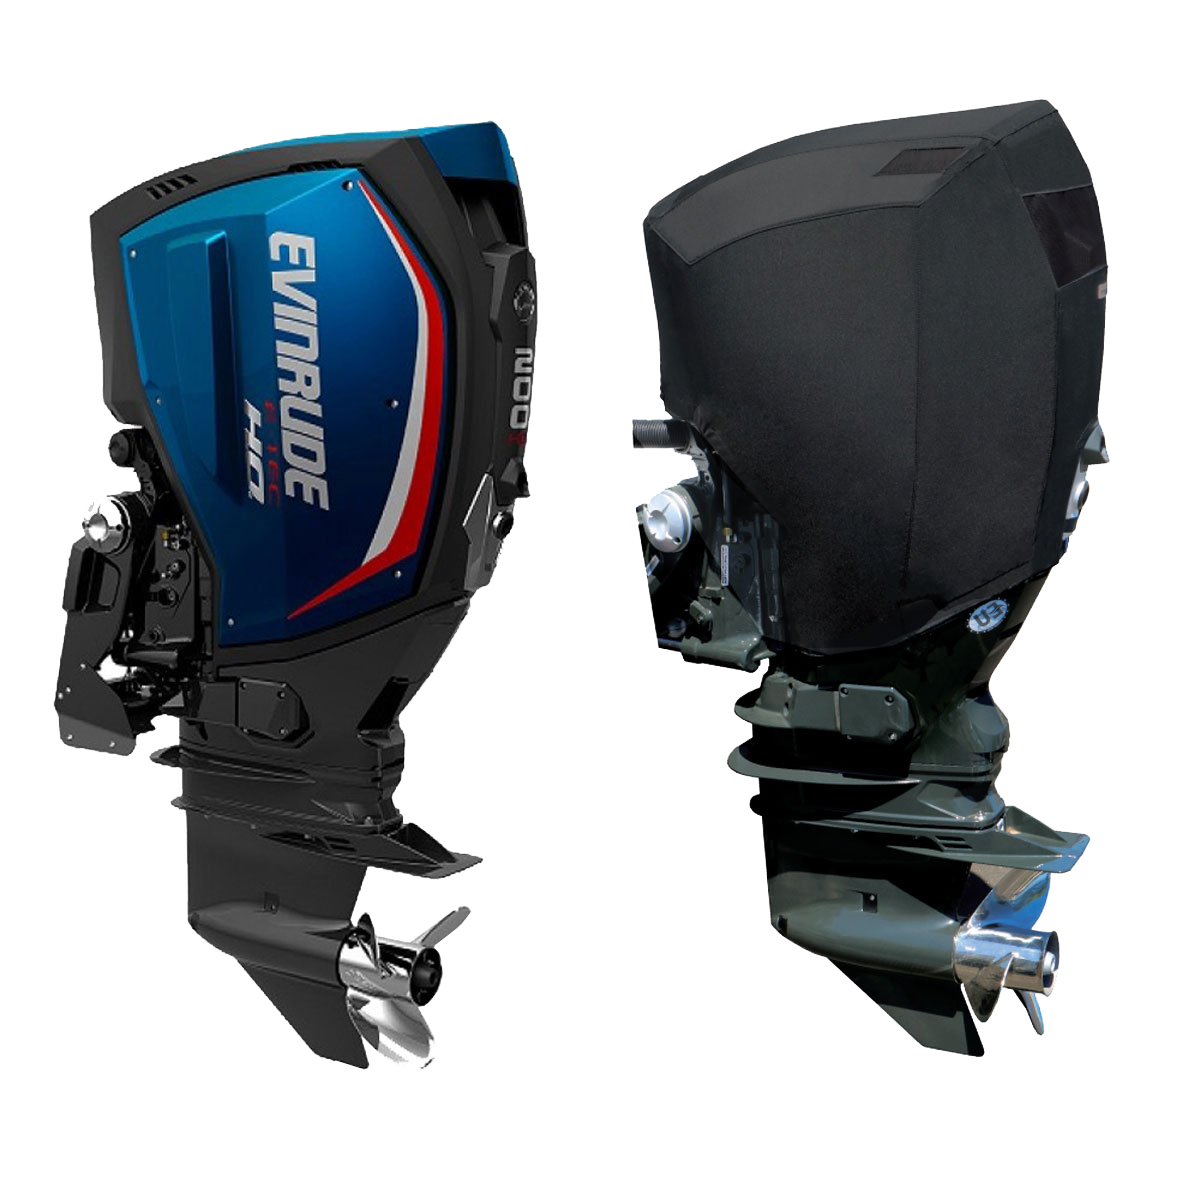 Vented Covers for Evinrude